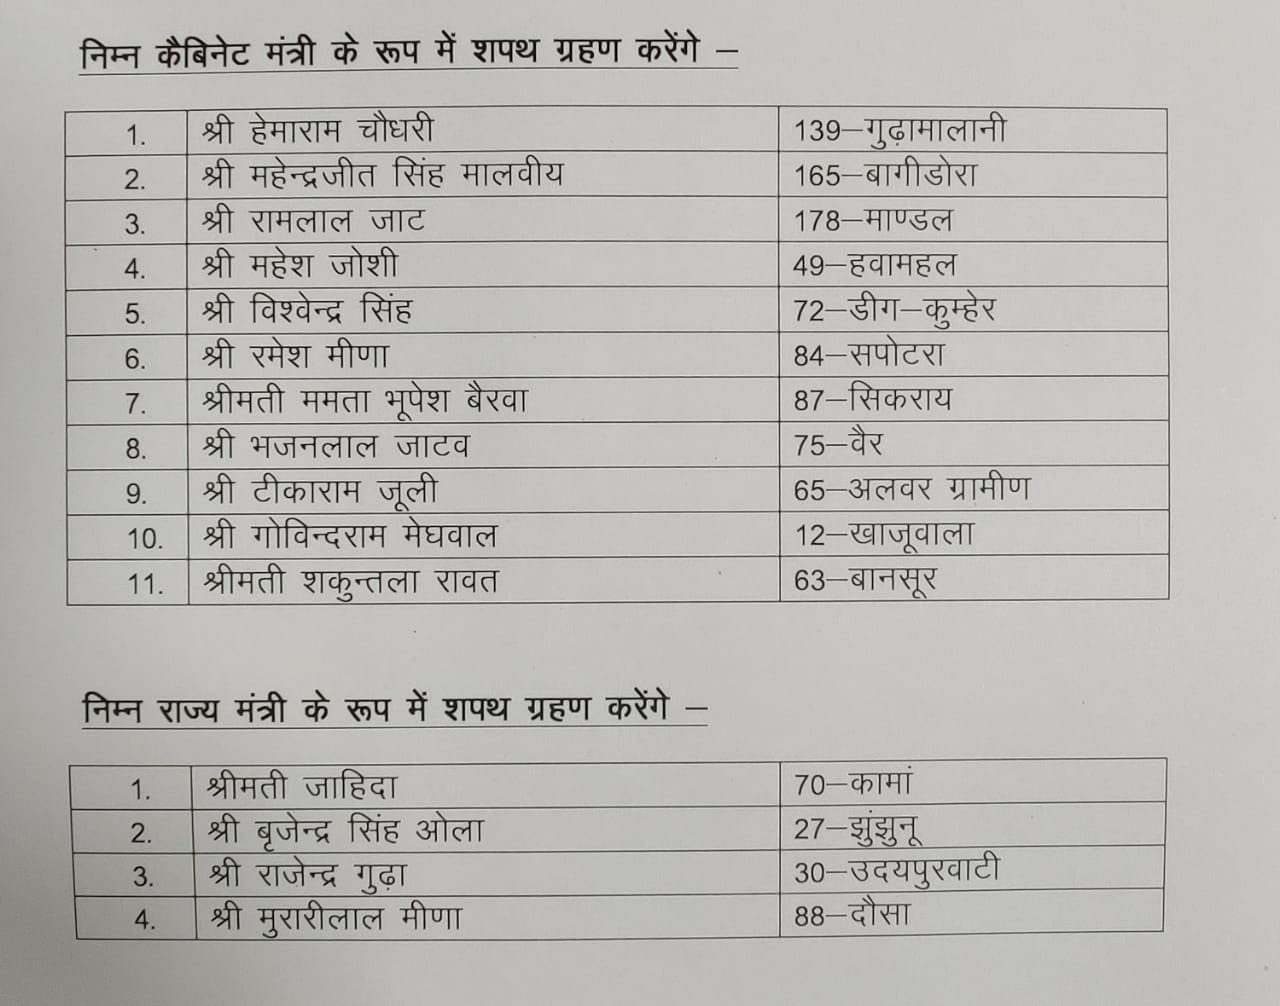 Cabinet reorganization in Rajasthan, Gehlot Government